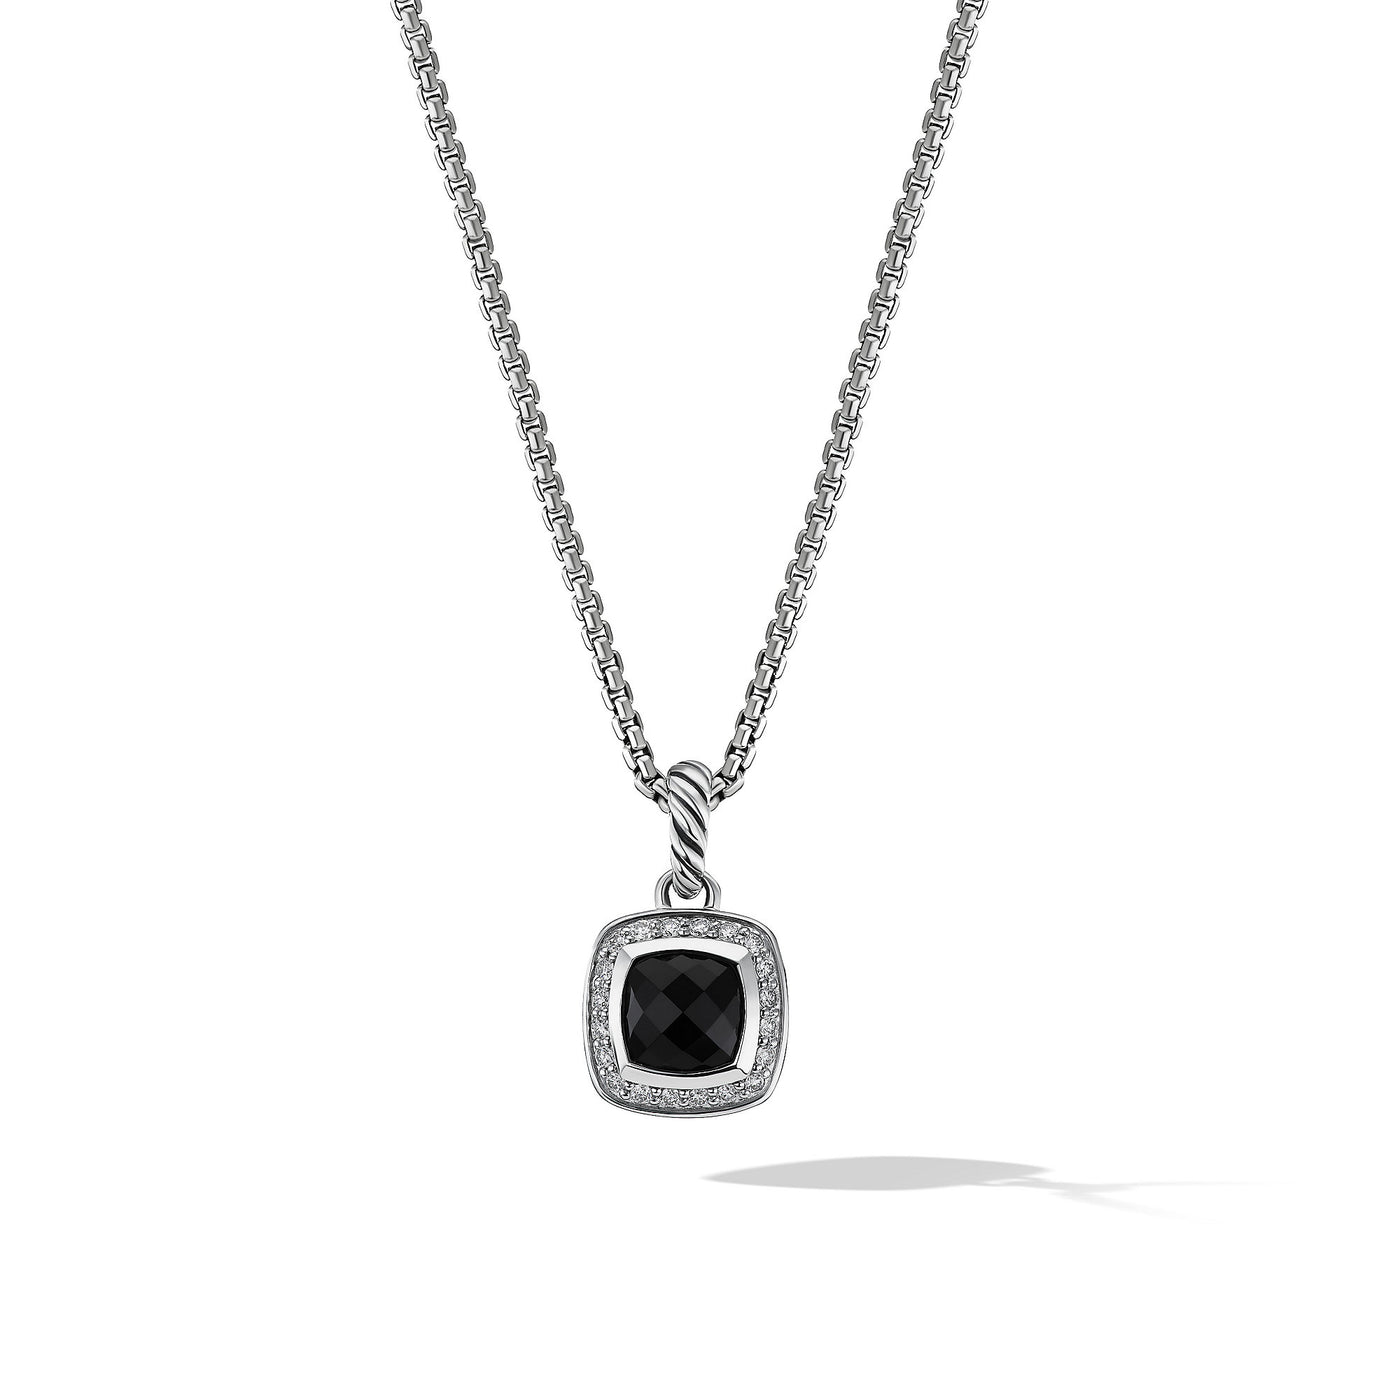 Petite Albion® Pendant Necklace in Sterling Silver with Black Onyx and Diamonds\, 7mm